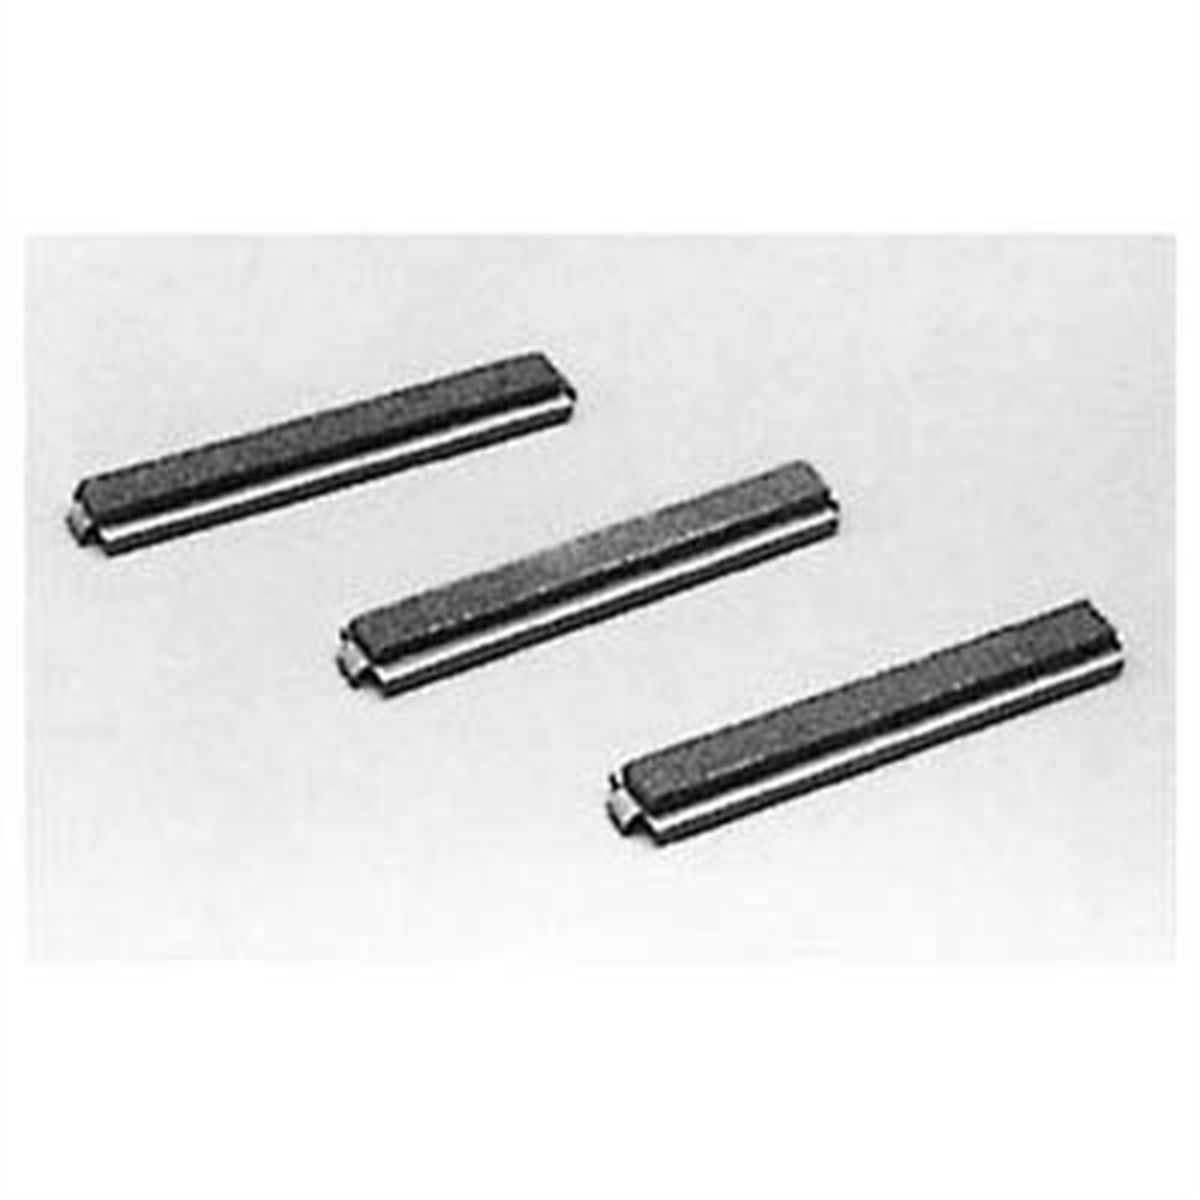 Replacement Stone Set for AMM3800 - 100 Grit